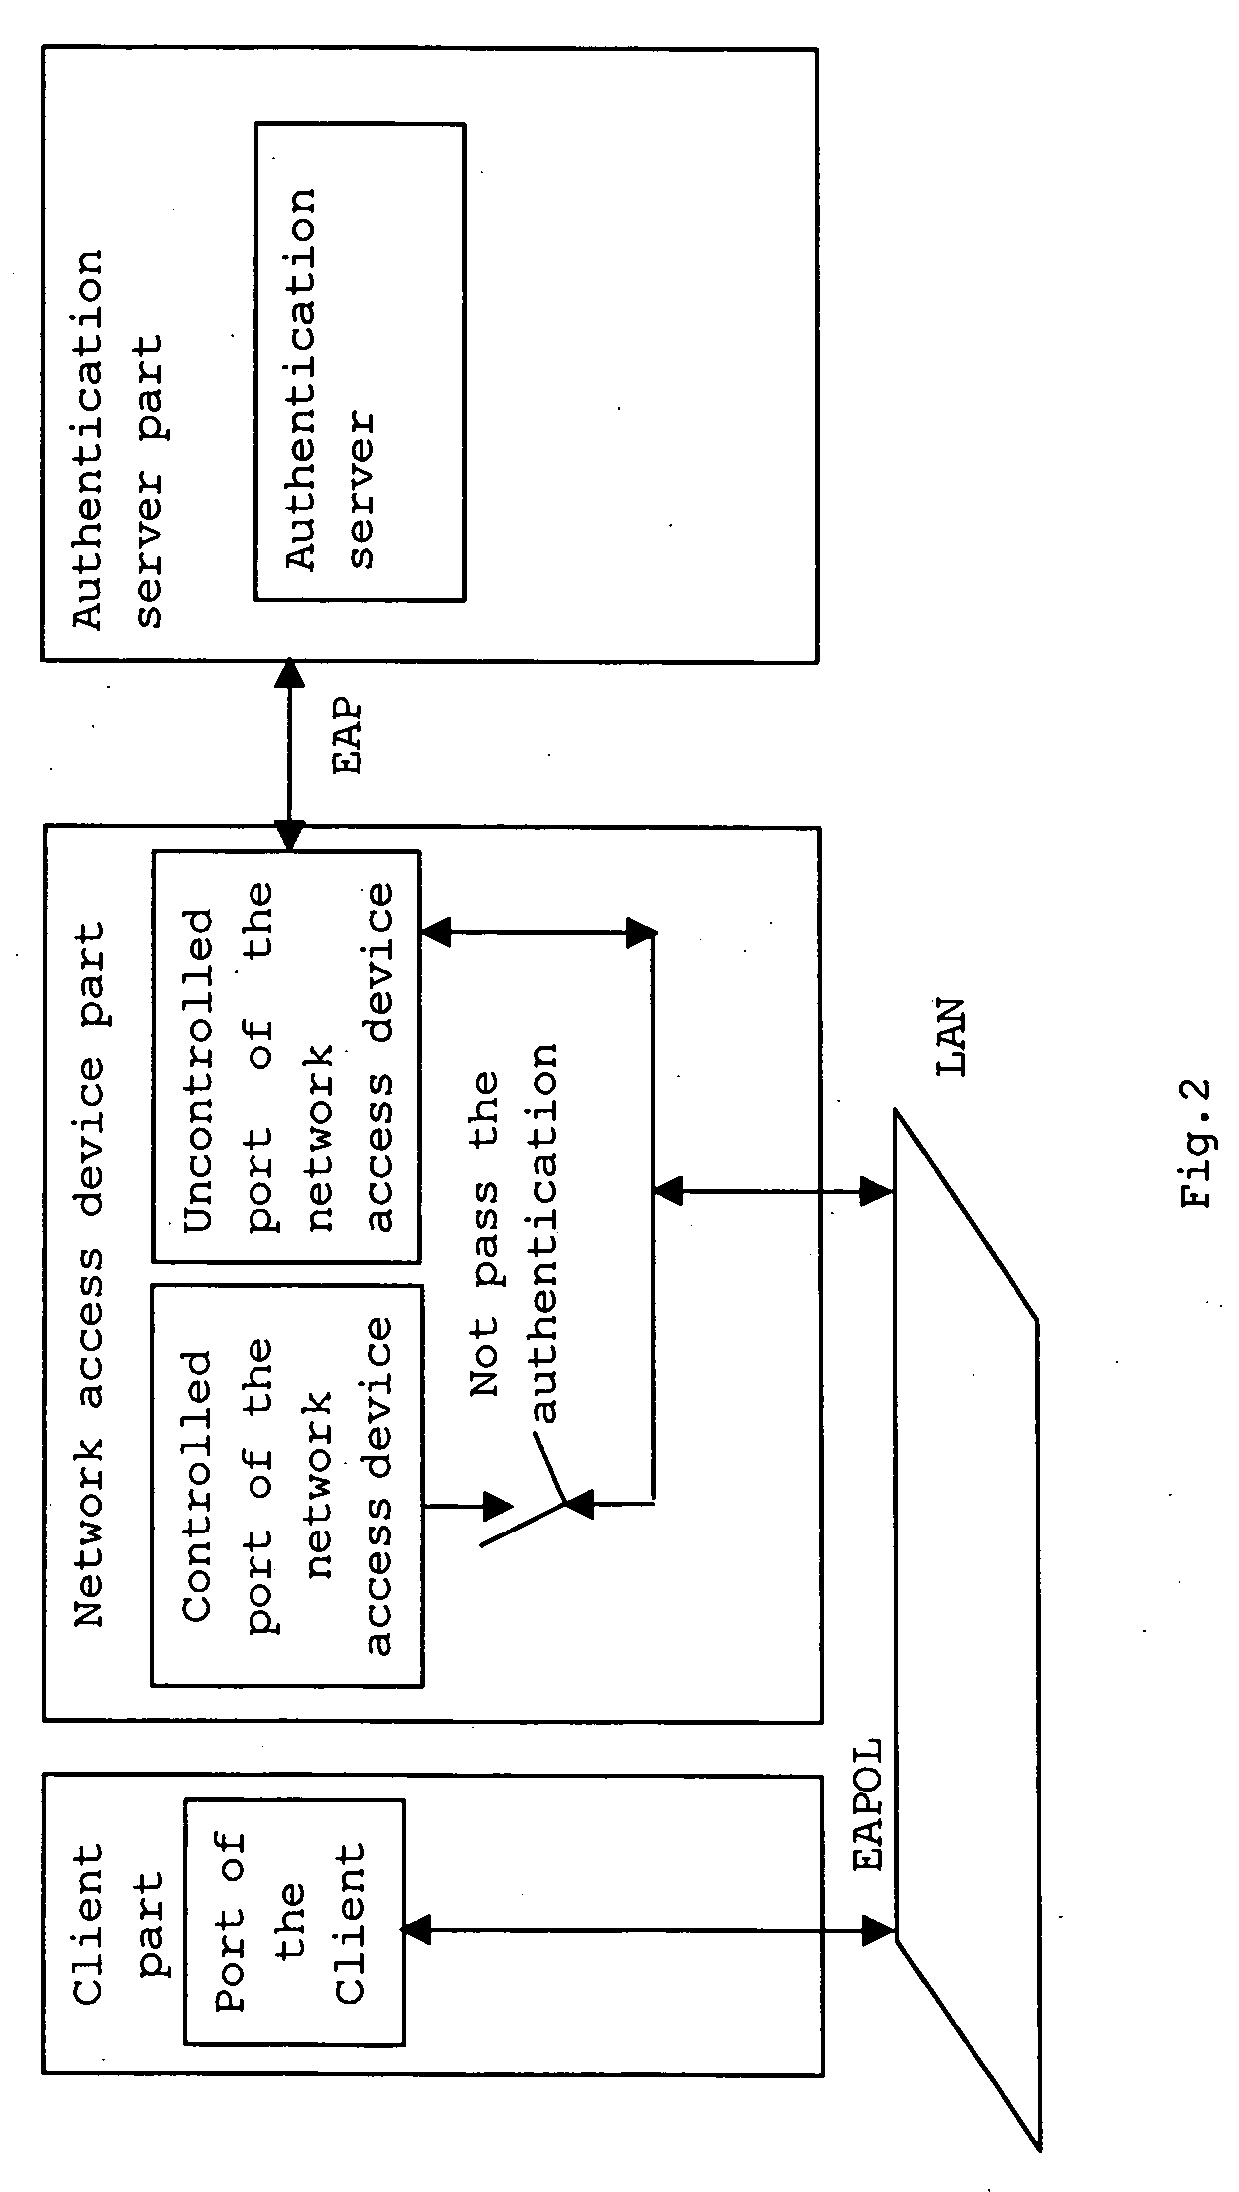 Method of implementing handshaking between 802.1X-based network access device and client